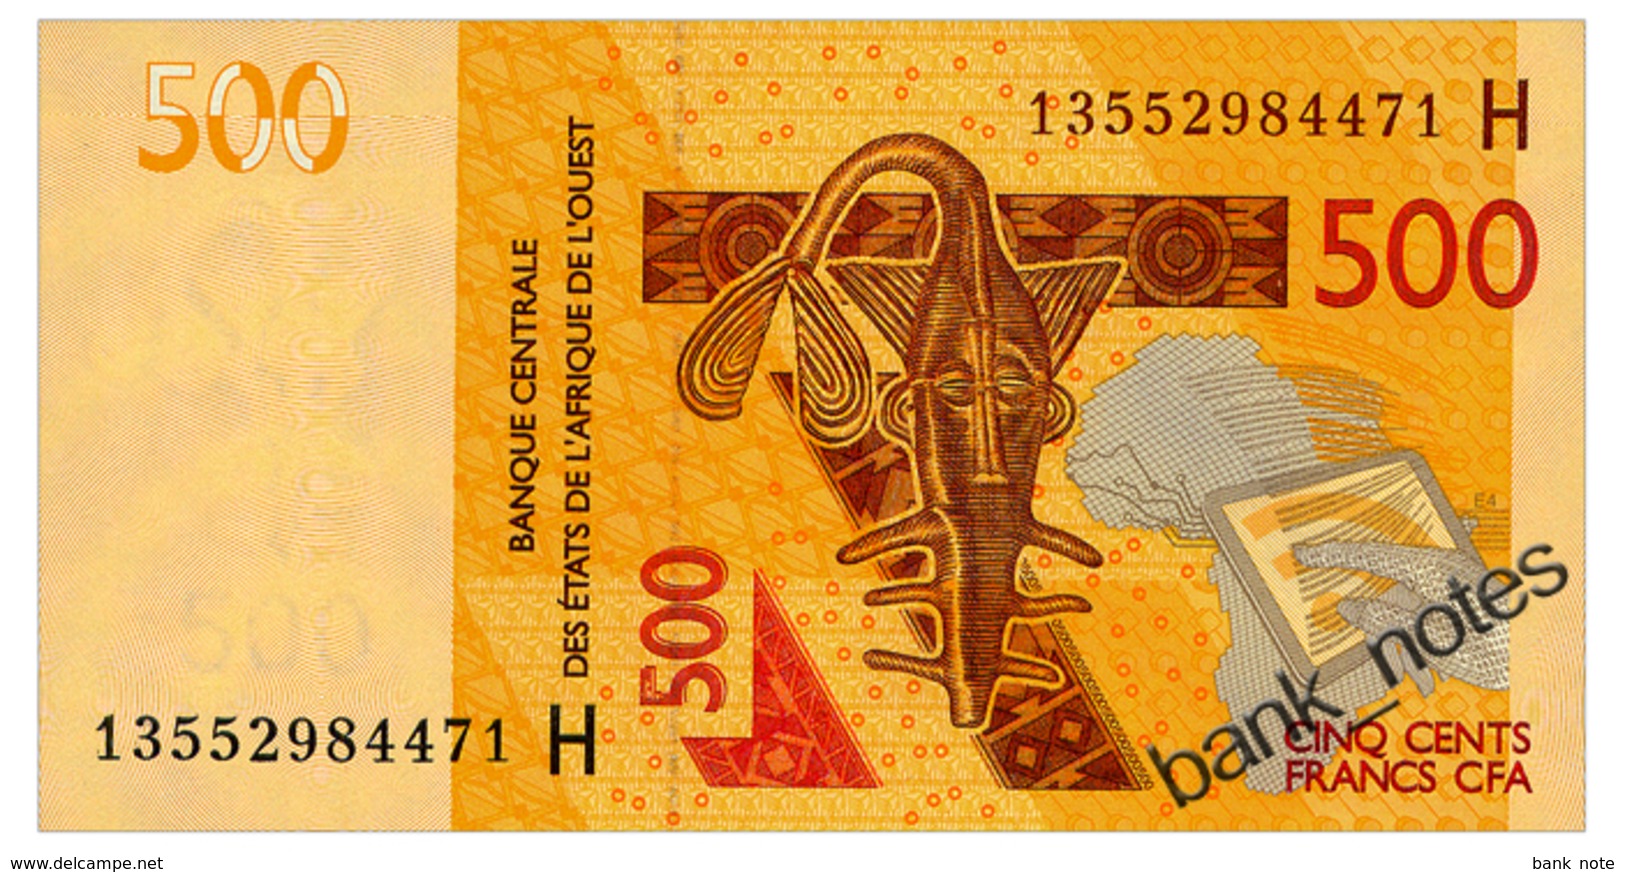 WEST AFRICAN STATES NIGER 500 FRANCS 2012/13 Pick 619Hb Unc - West African States